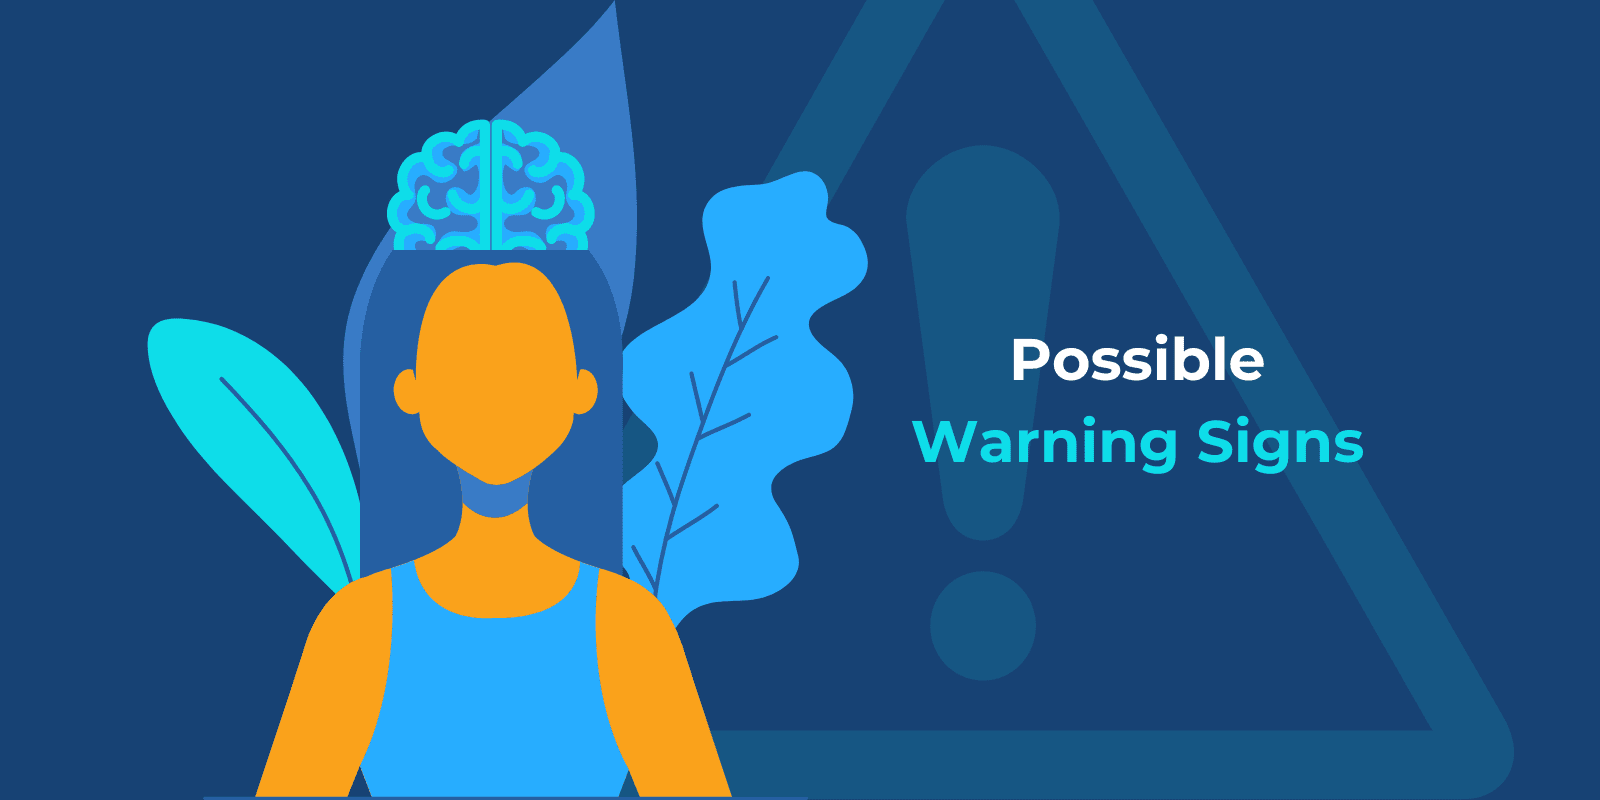 "Possible Warning Signs" text written next to an illustration of a girl and a brain on top of her head.